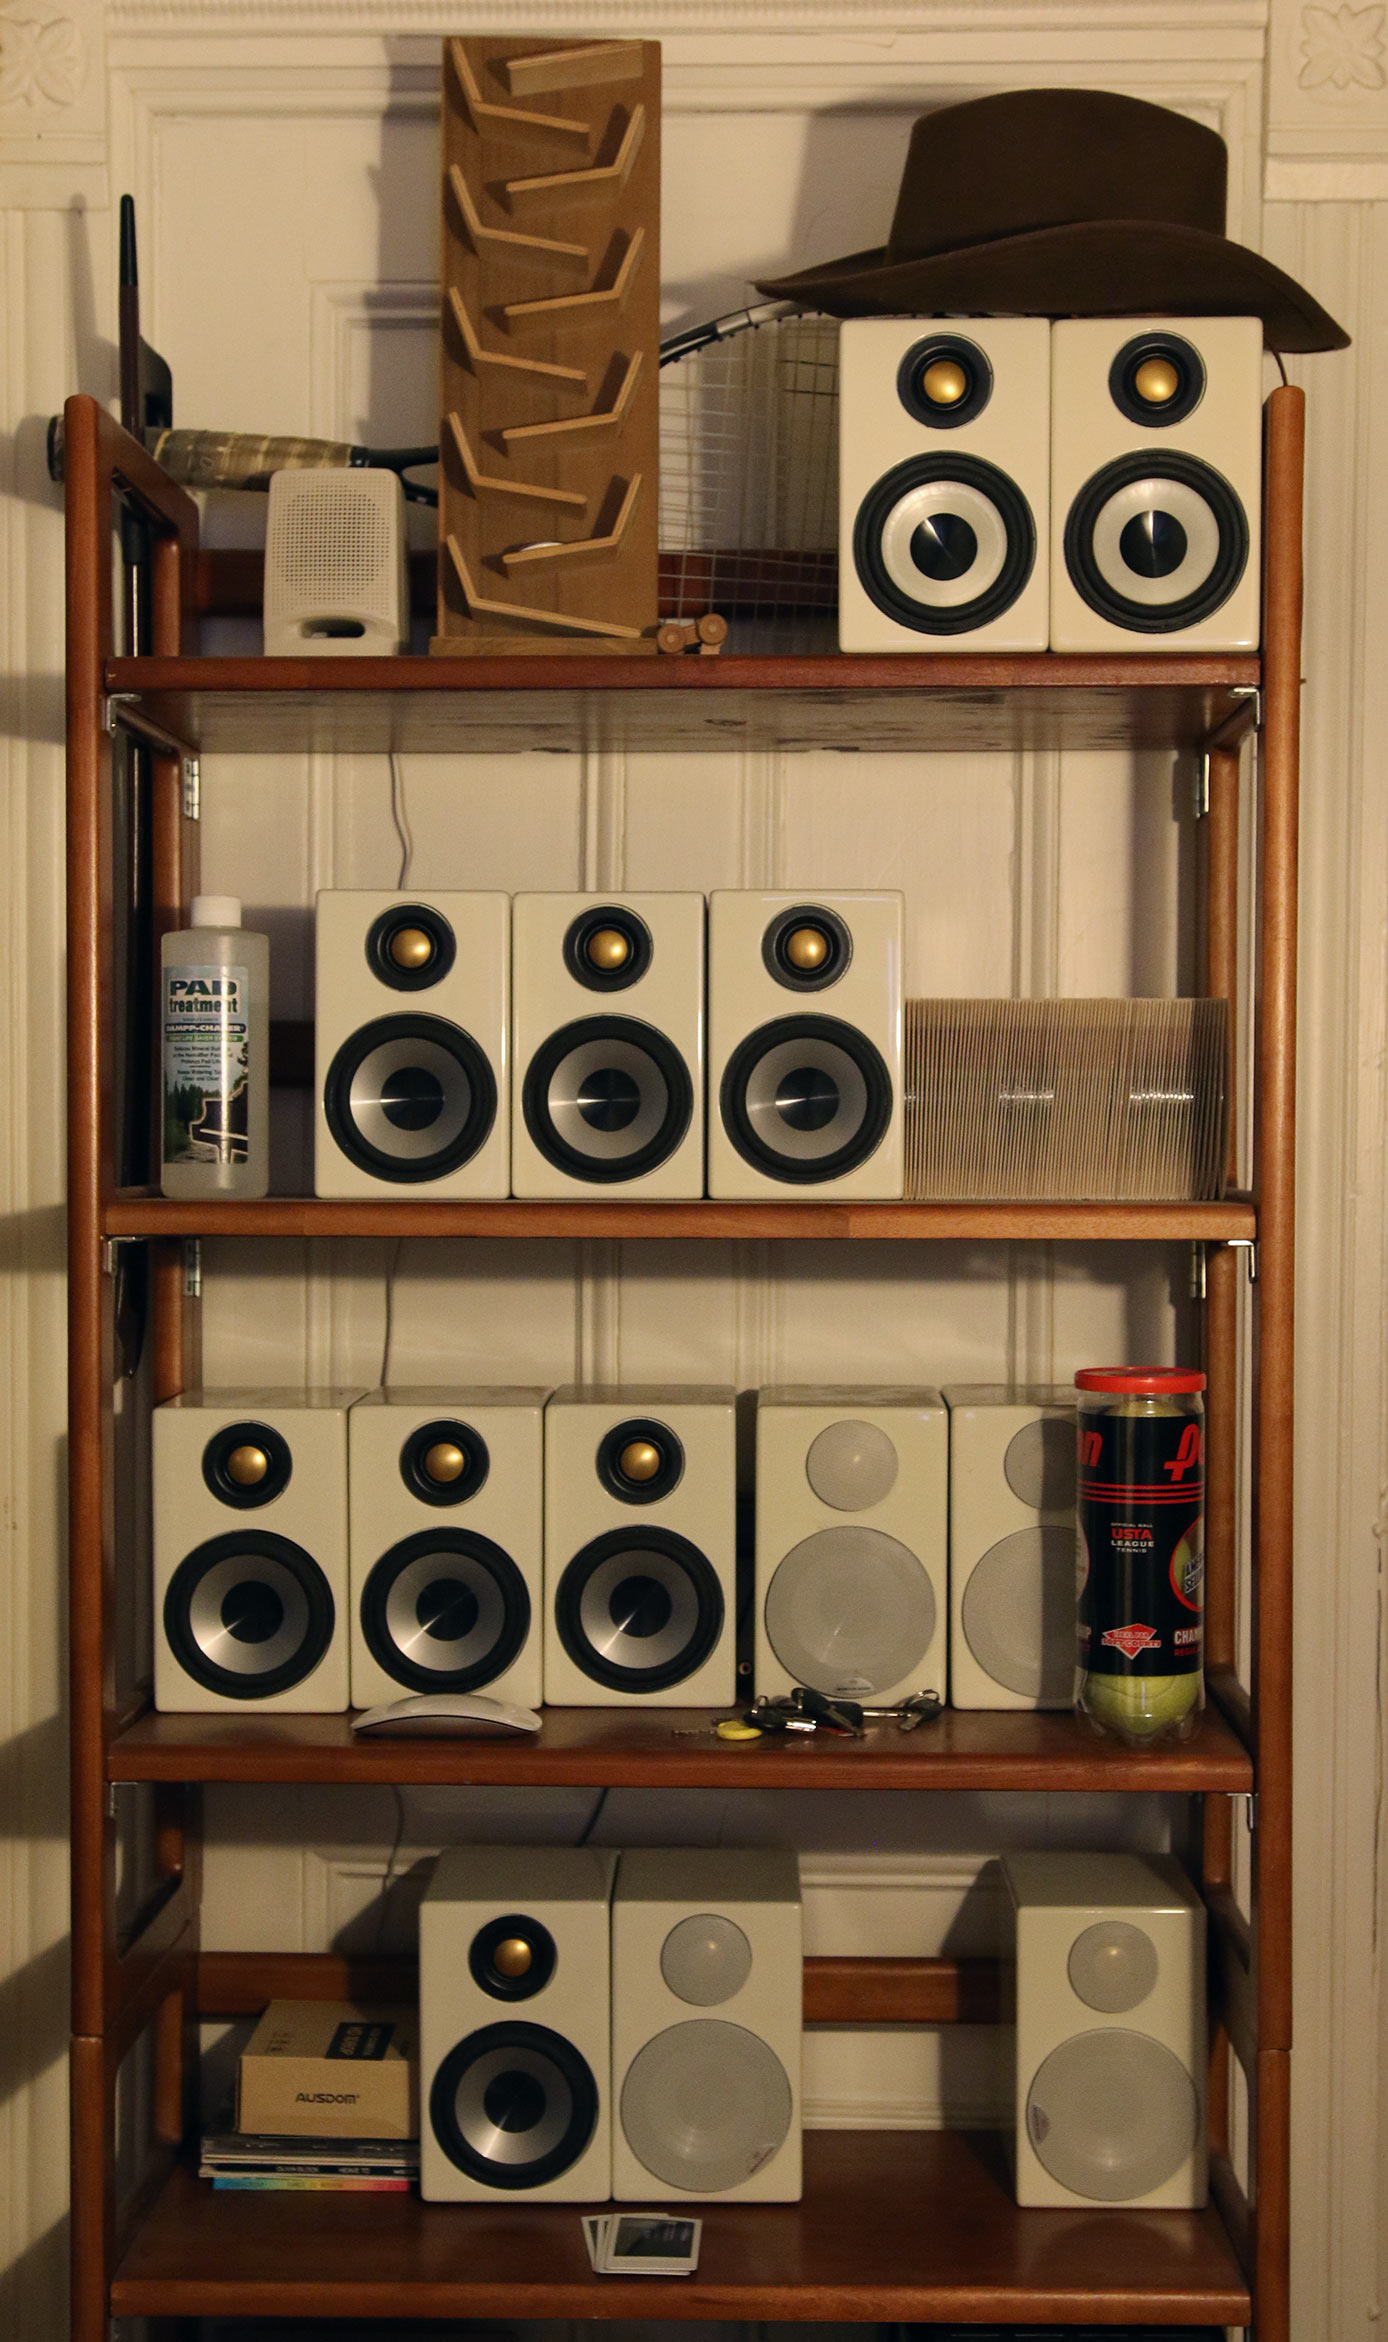 A bookcase in Schumacher's hallway that is filled with speakers and a hat on top of one of them.